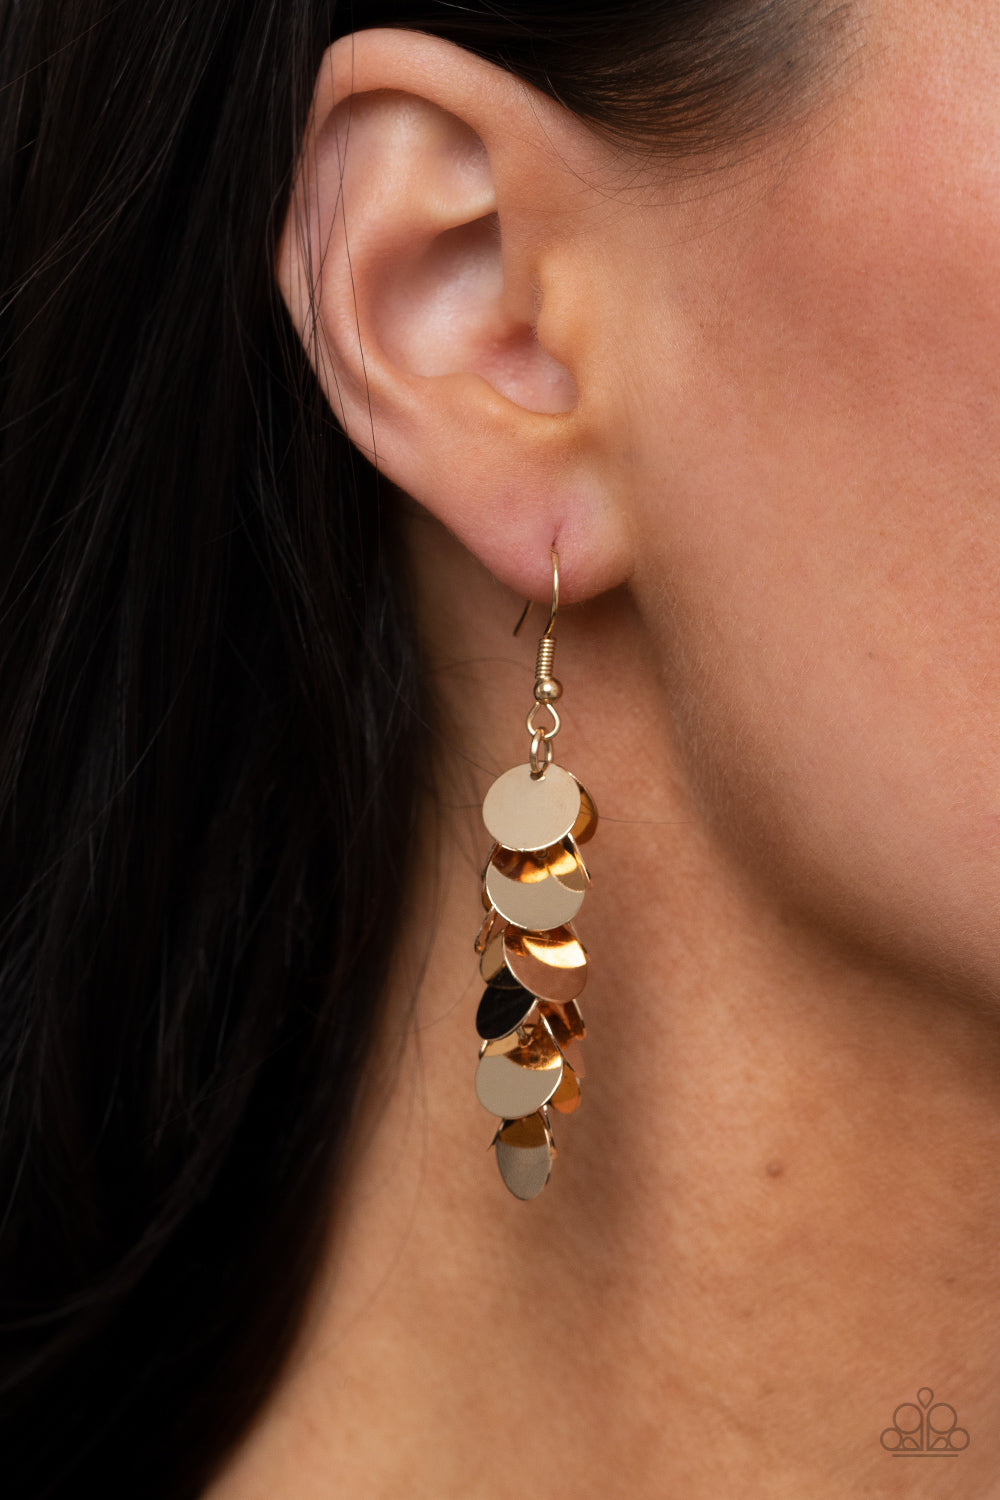 Paparazzi Jewelry & Accessories - Hear Me Shimmer - Gold Earrings. Bling By Titia Boutique